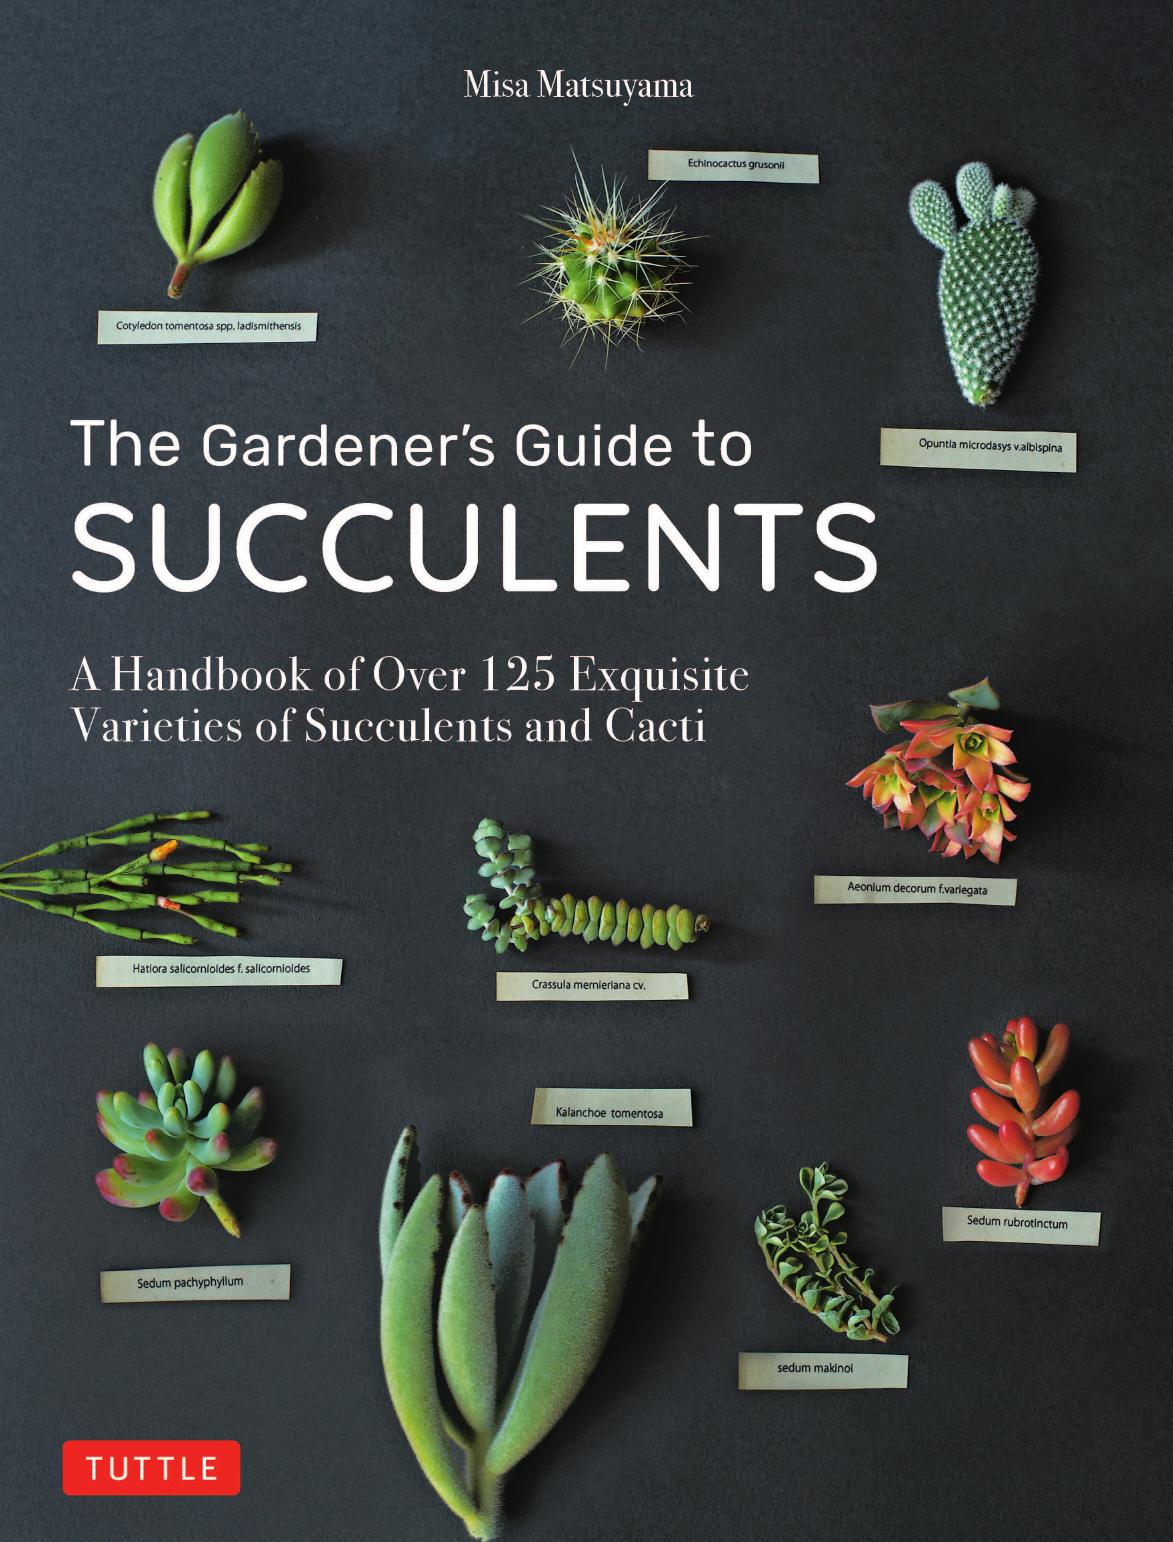 The Gardener's Guide to Succulents by Misa Matsuyama